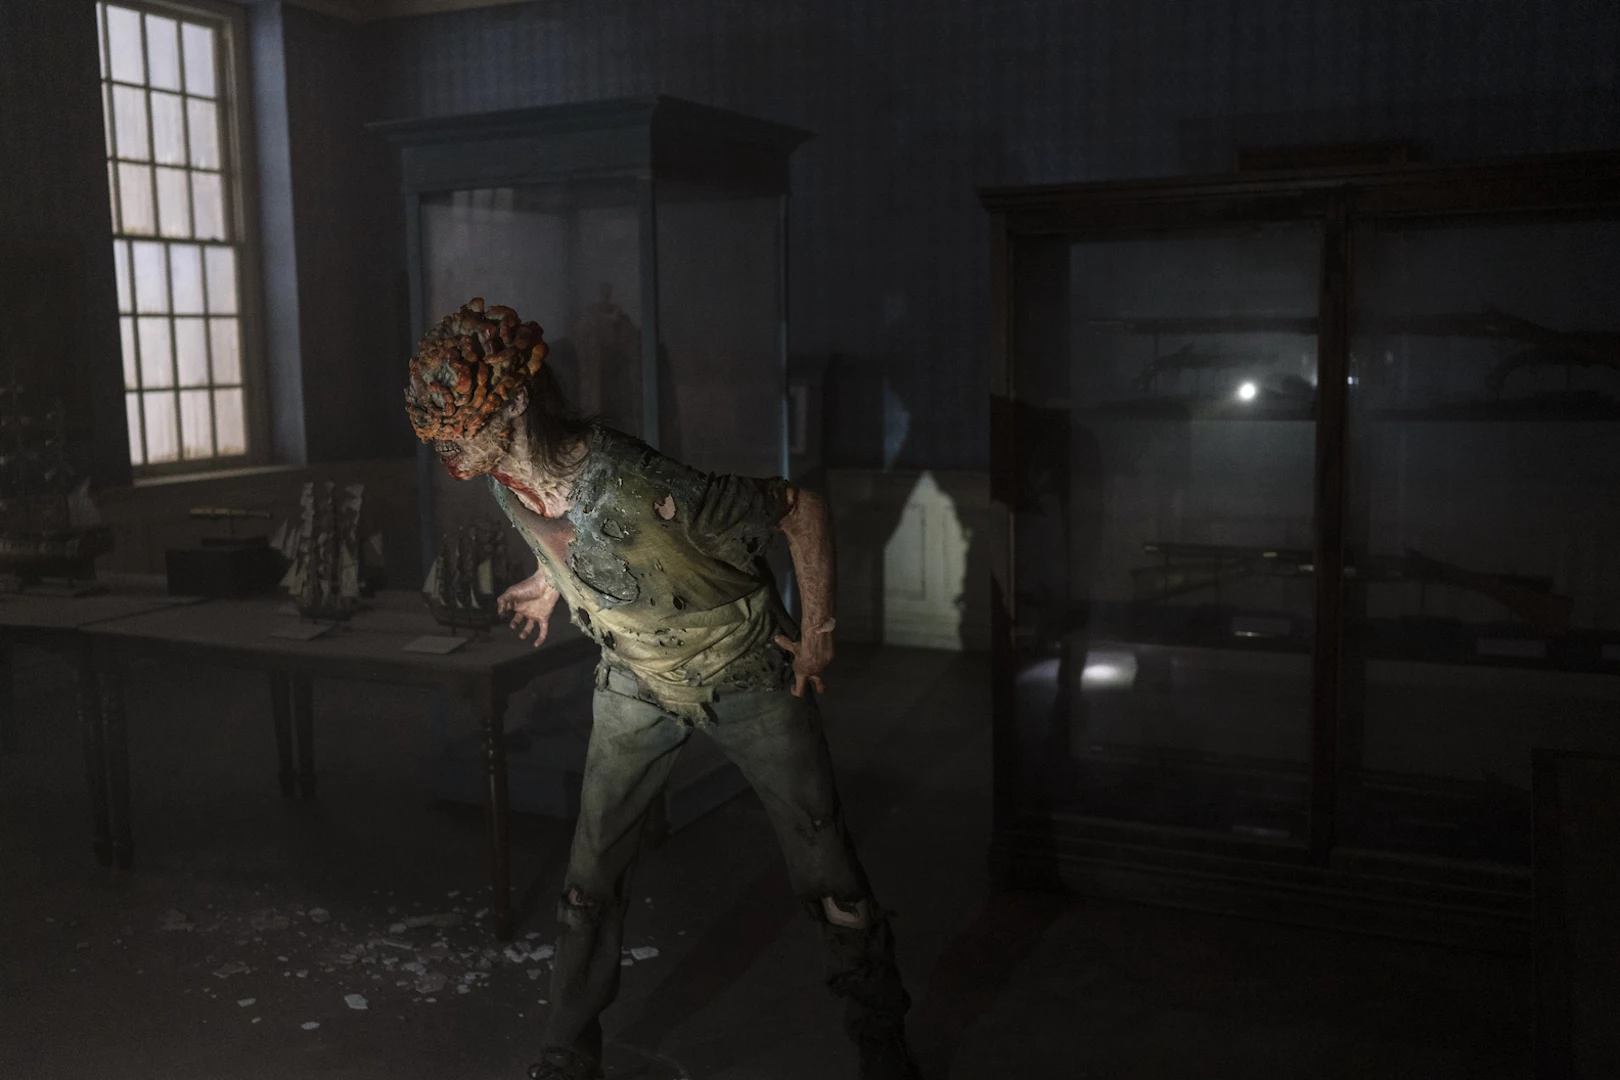 The Last of Us' Episode 2 Makes Some Major Changes to Game's Story